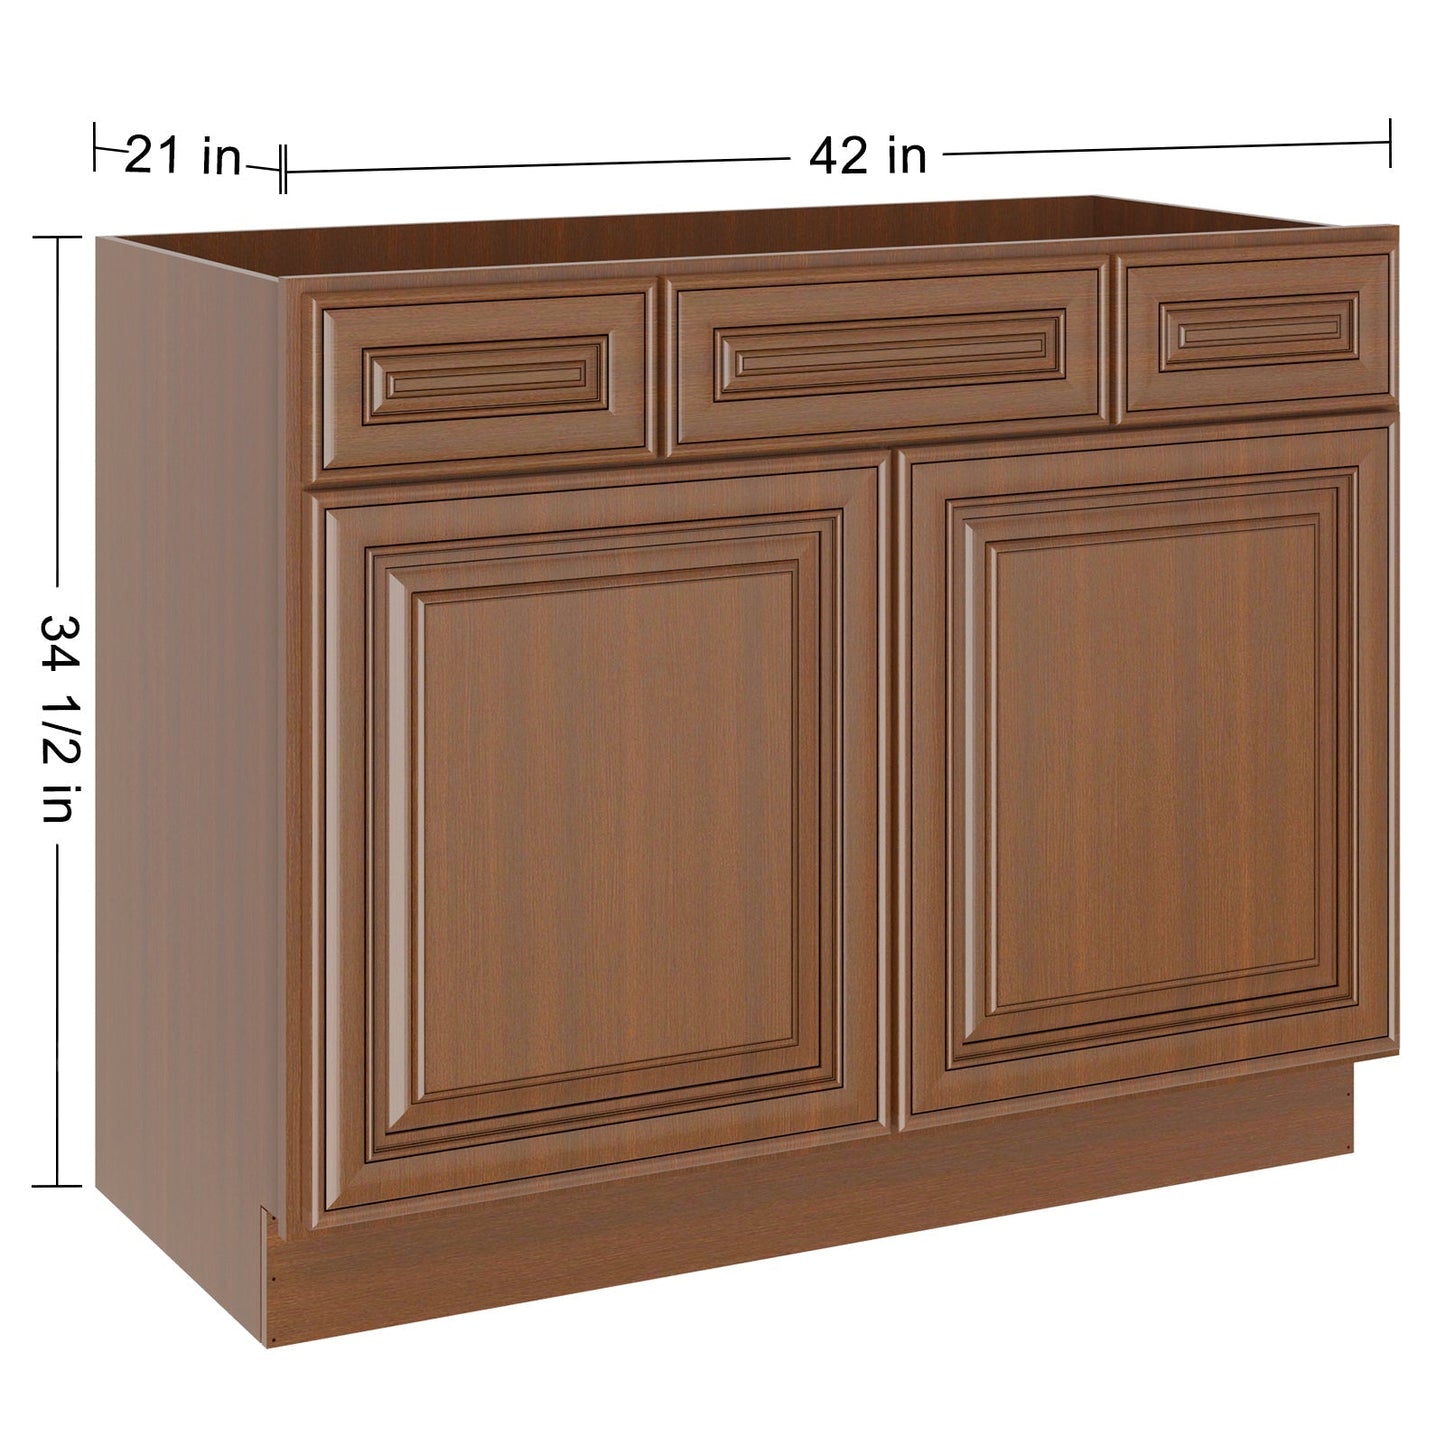 42"W Birch Solid Wood X 21"D X 34-1/2"H Vanity Sink Drawer Cabinet Wthout Top VSD42